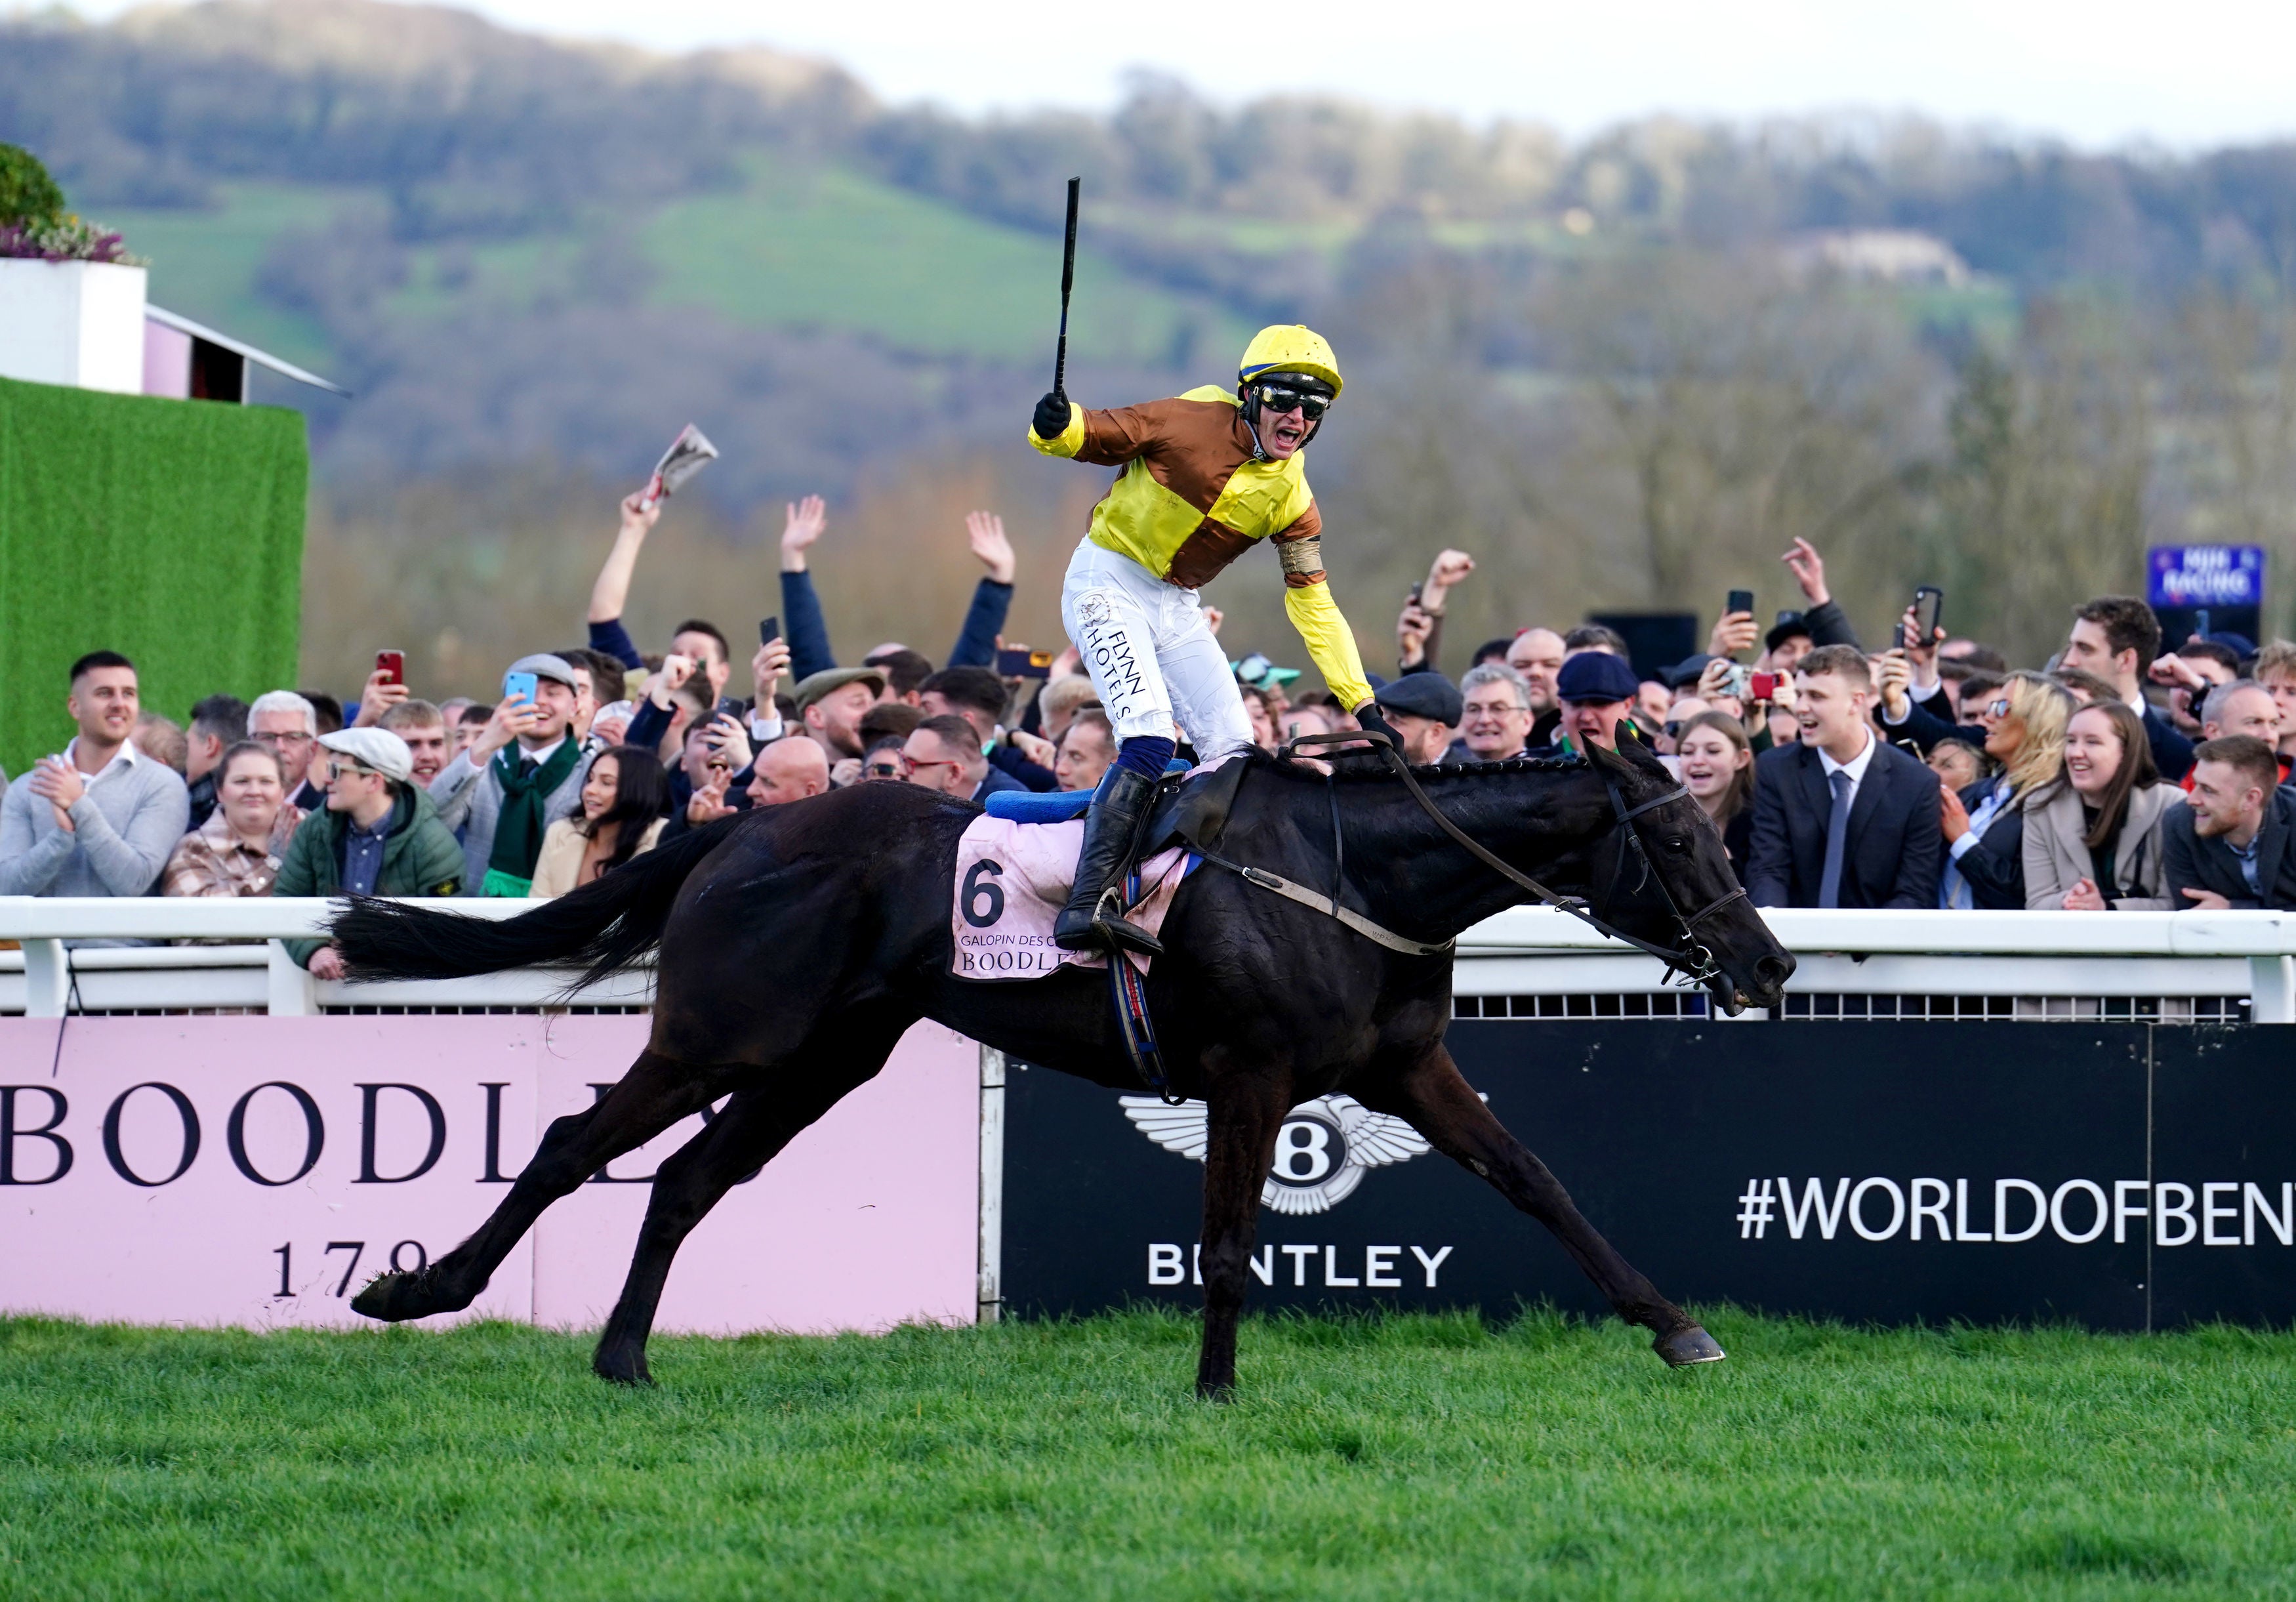 Jockey Paul Towend and Galopin des Champs win the 2023 Cheltenham Gold Cup